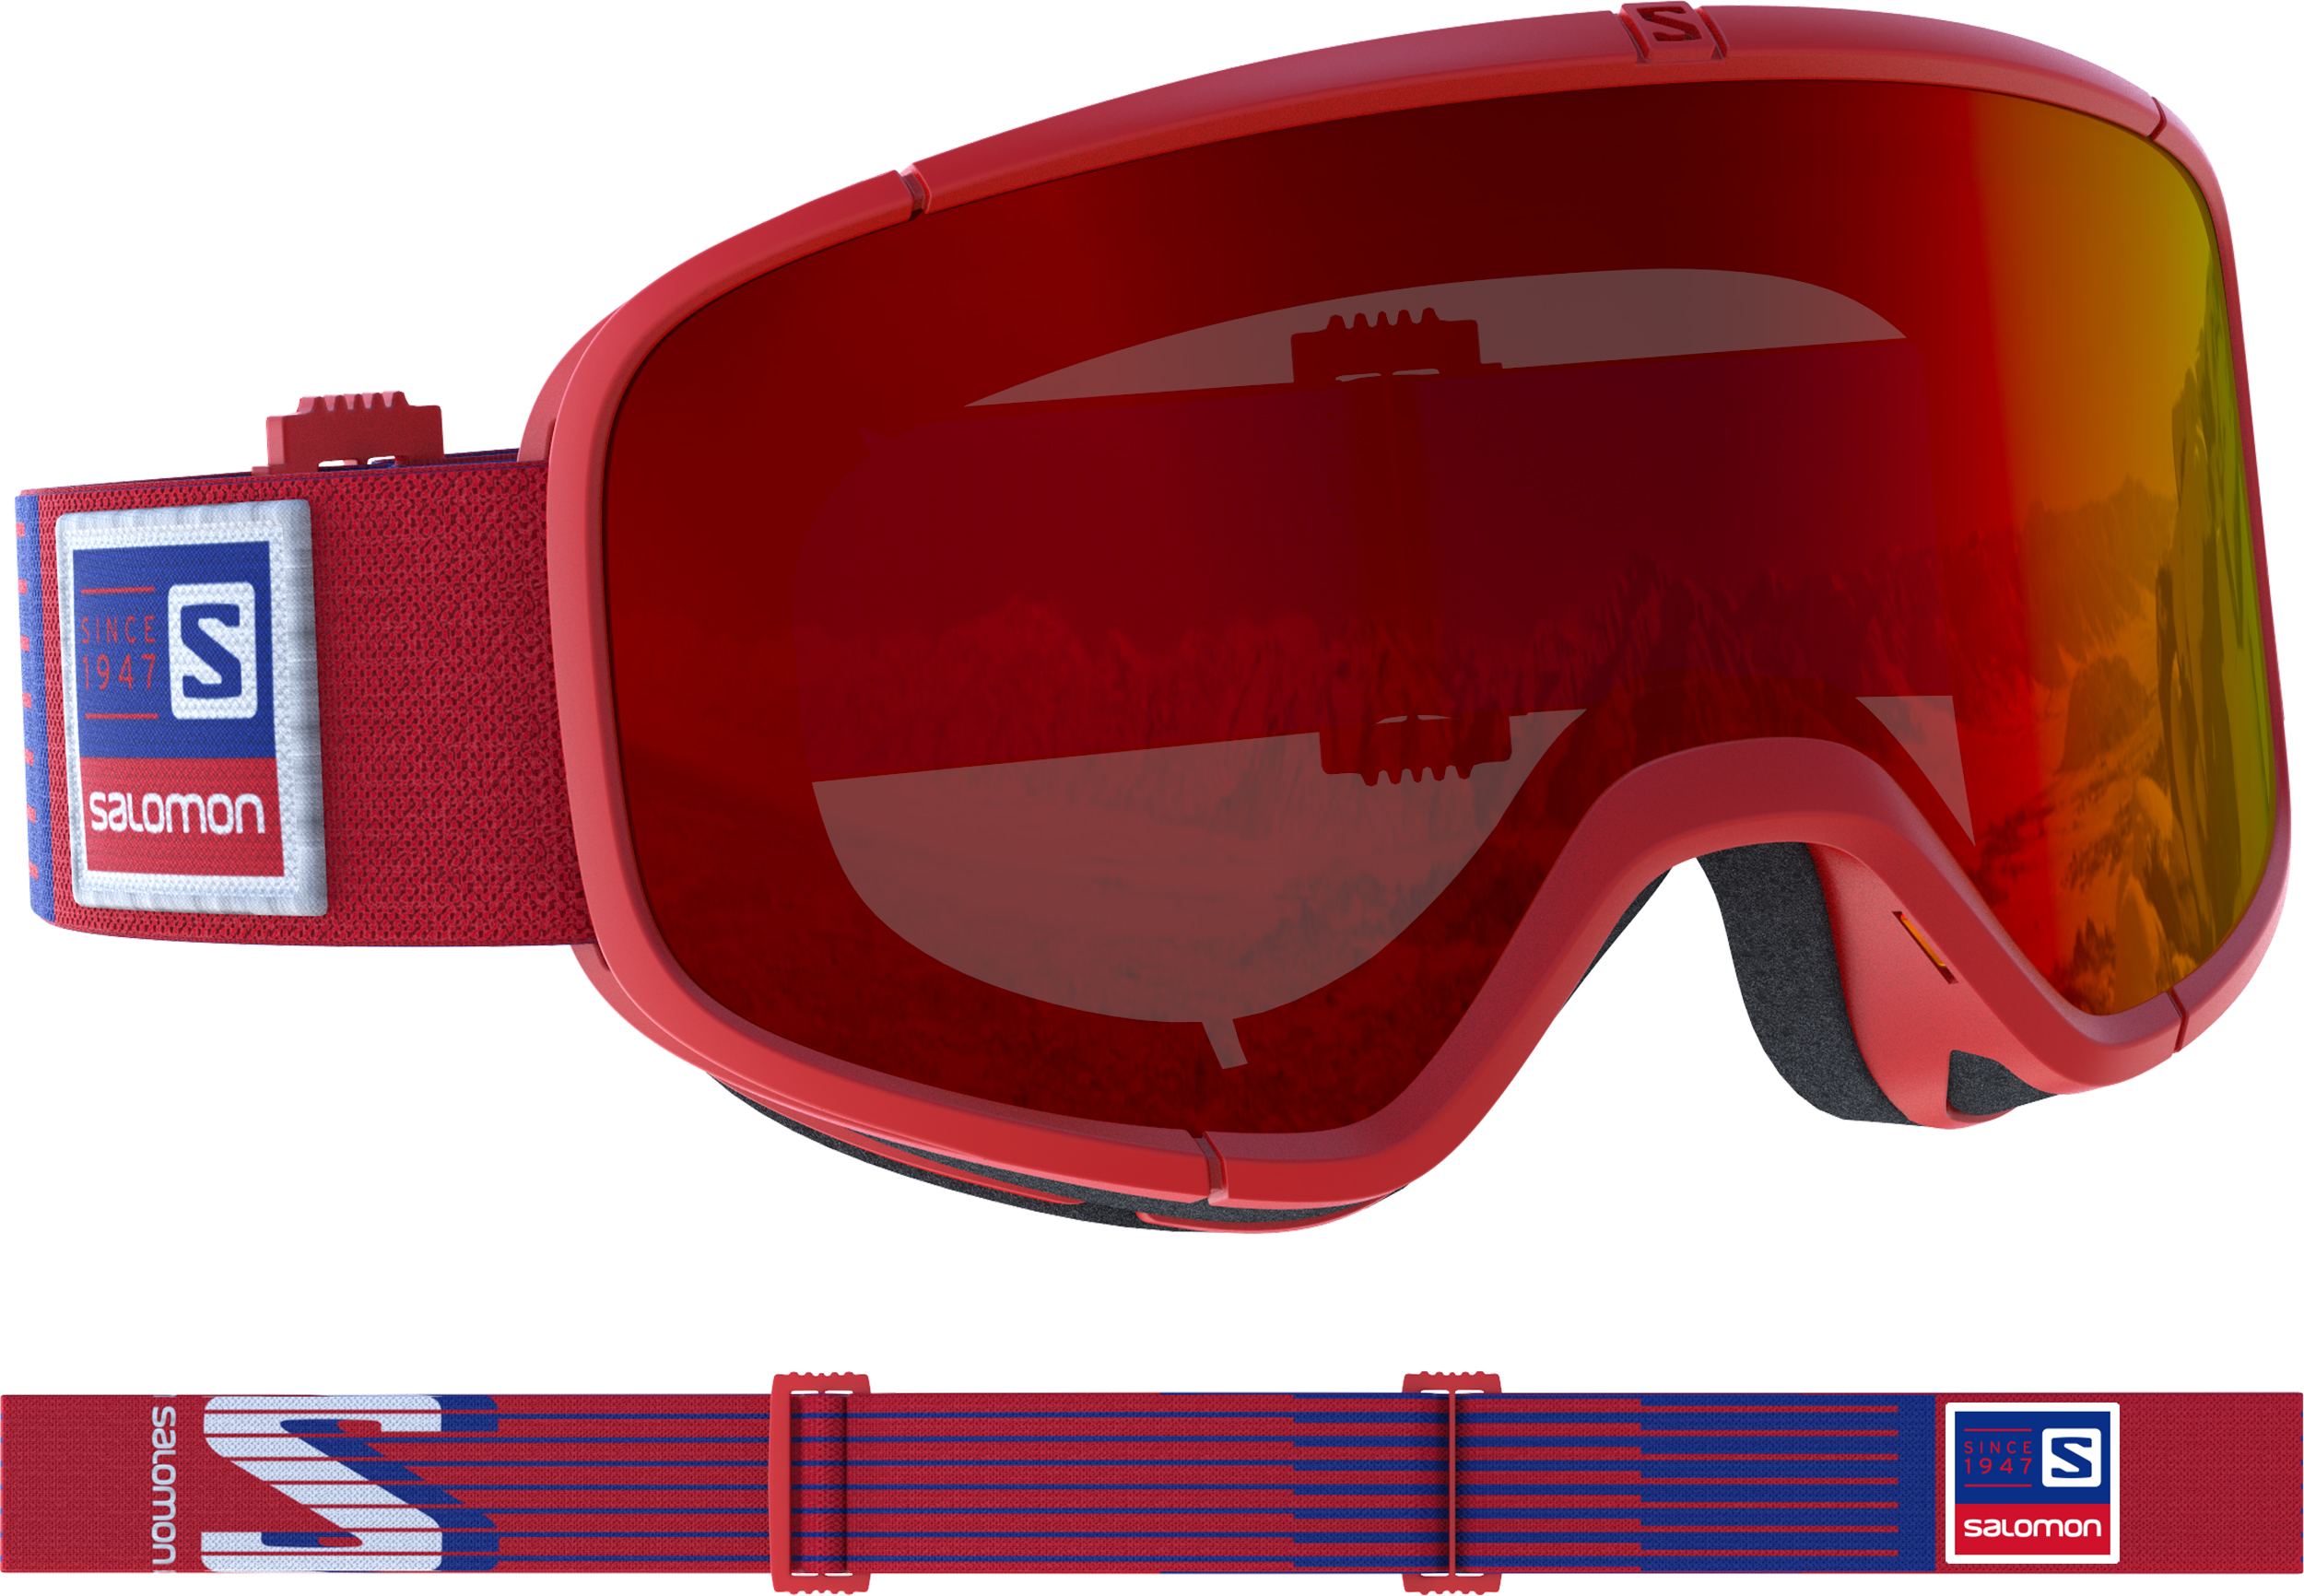 COMPLETE OUR 2018 SURVEY TO WIN PAIR OF SALOMON FOUR SEVEN GOGGLES | Line